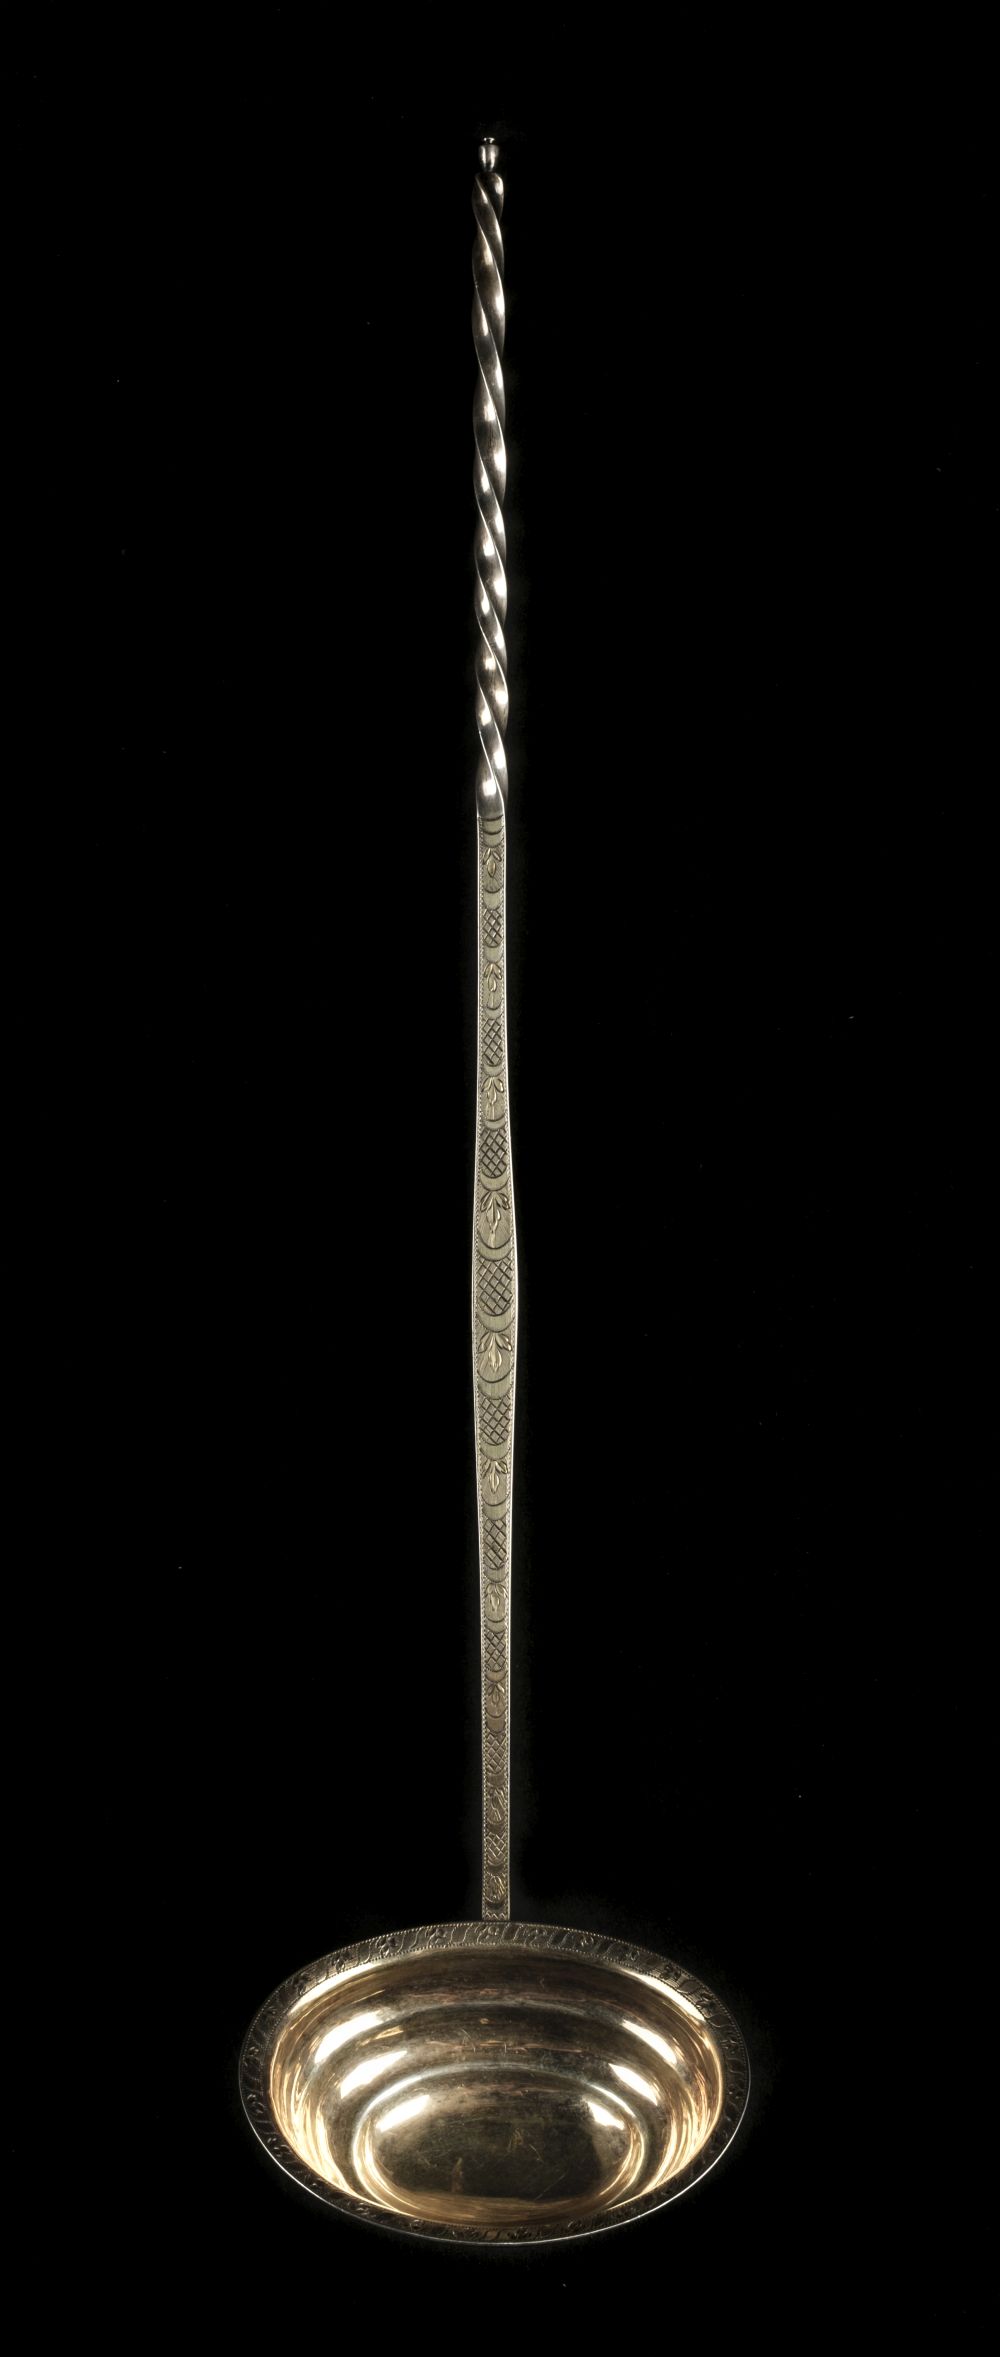 * Toddy Ladle. A George III silver-gilt toddy ladle by John Shea, London 1809